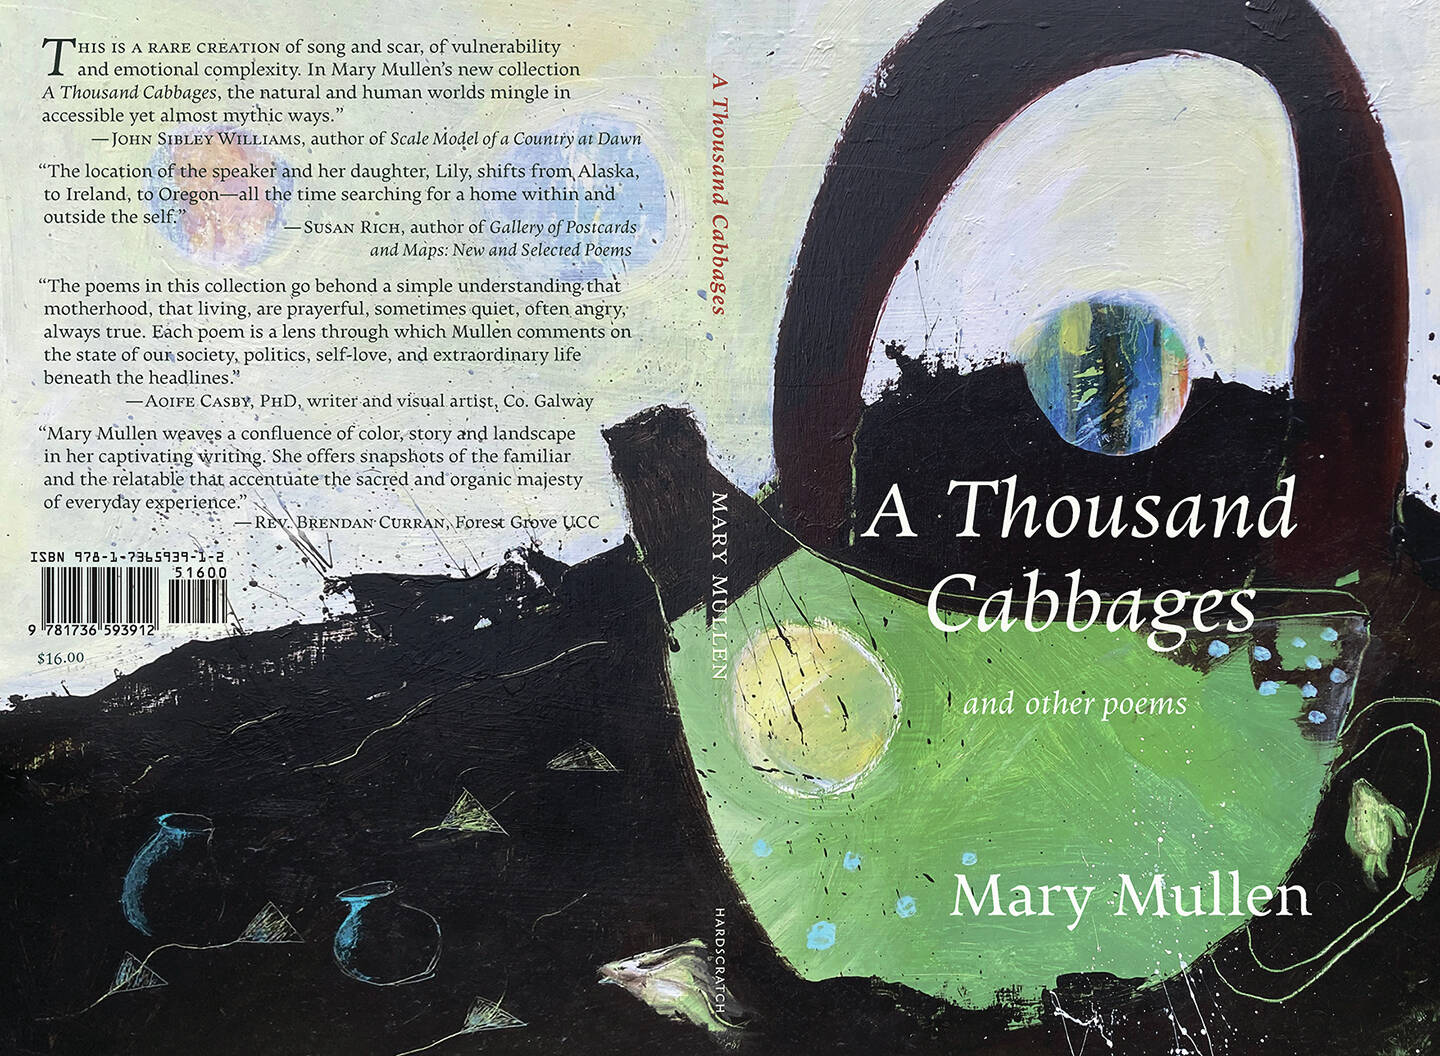 “A Thousand Cabbages and other poems” by Mary Mullen. Published by Hardscratch Press, 2023. (Promotional photo)